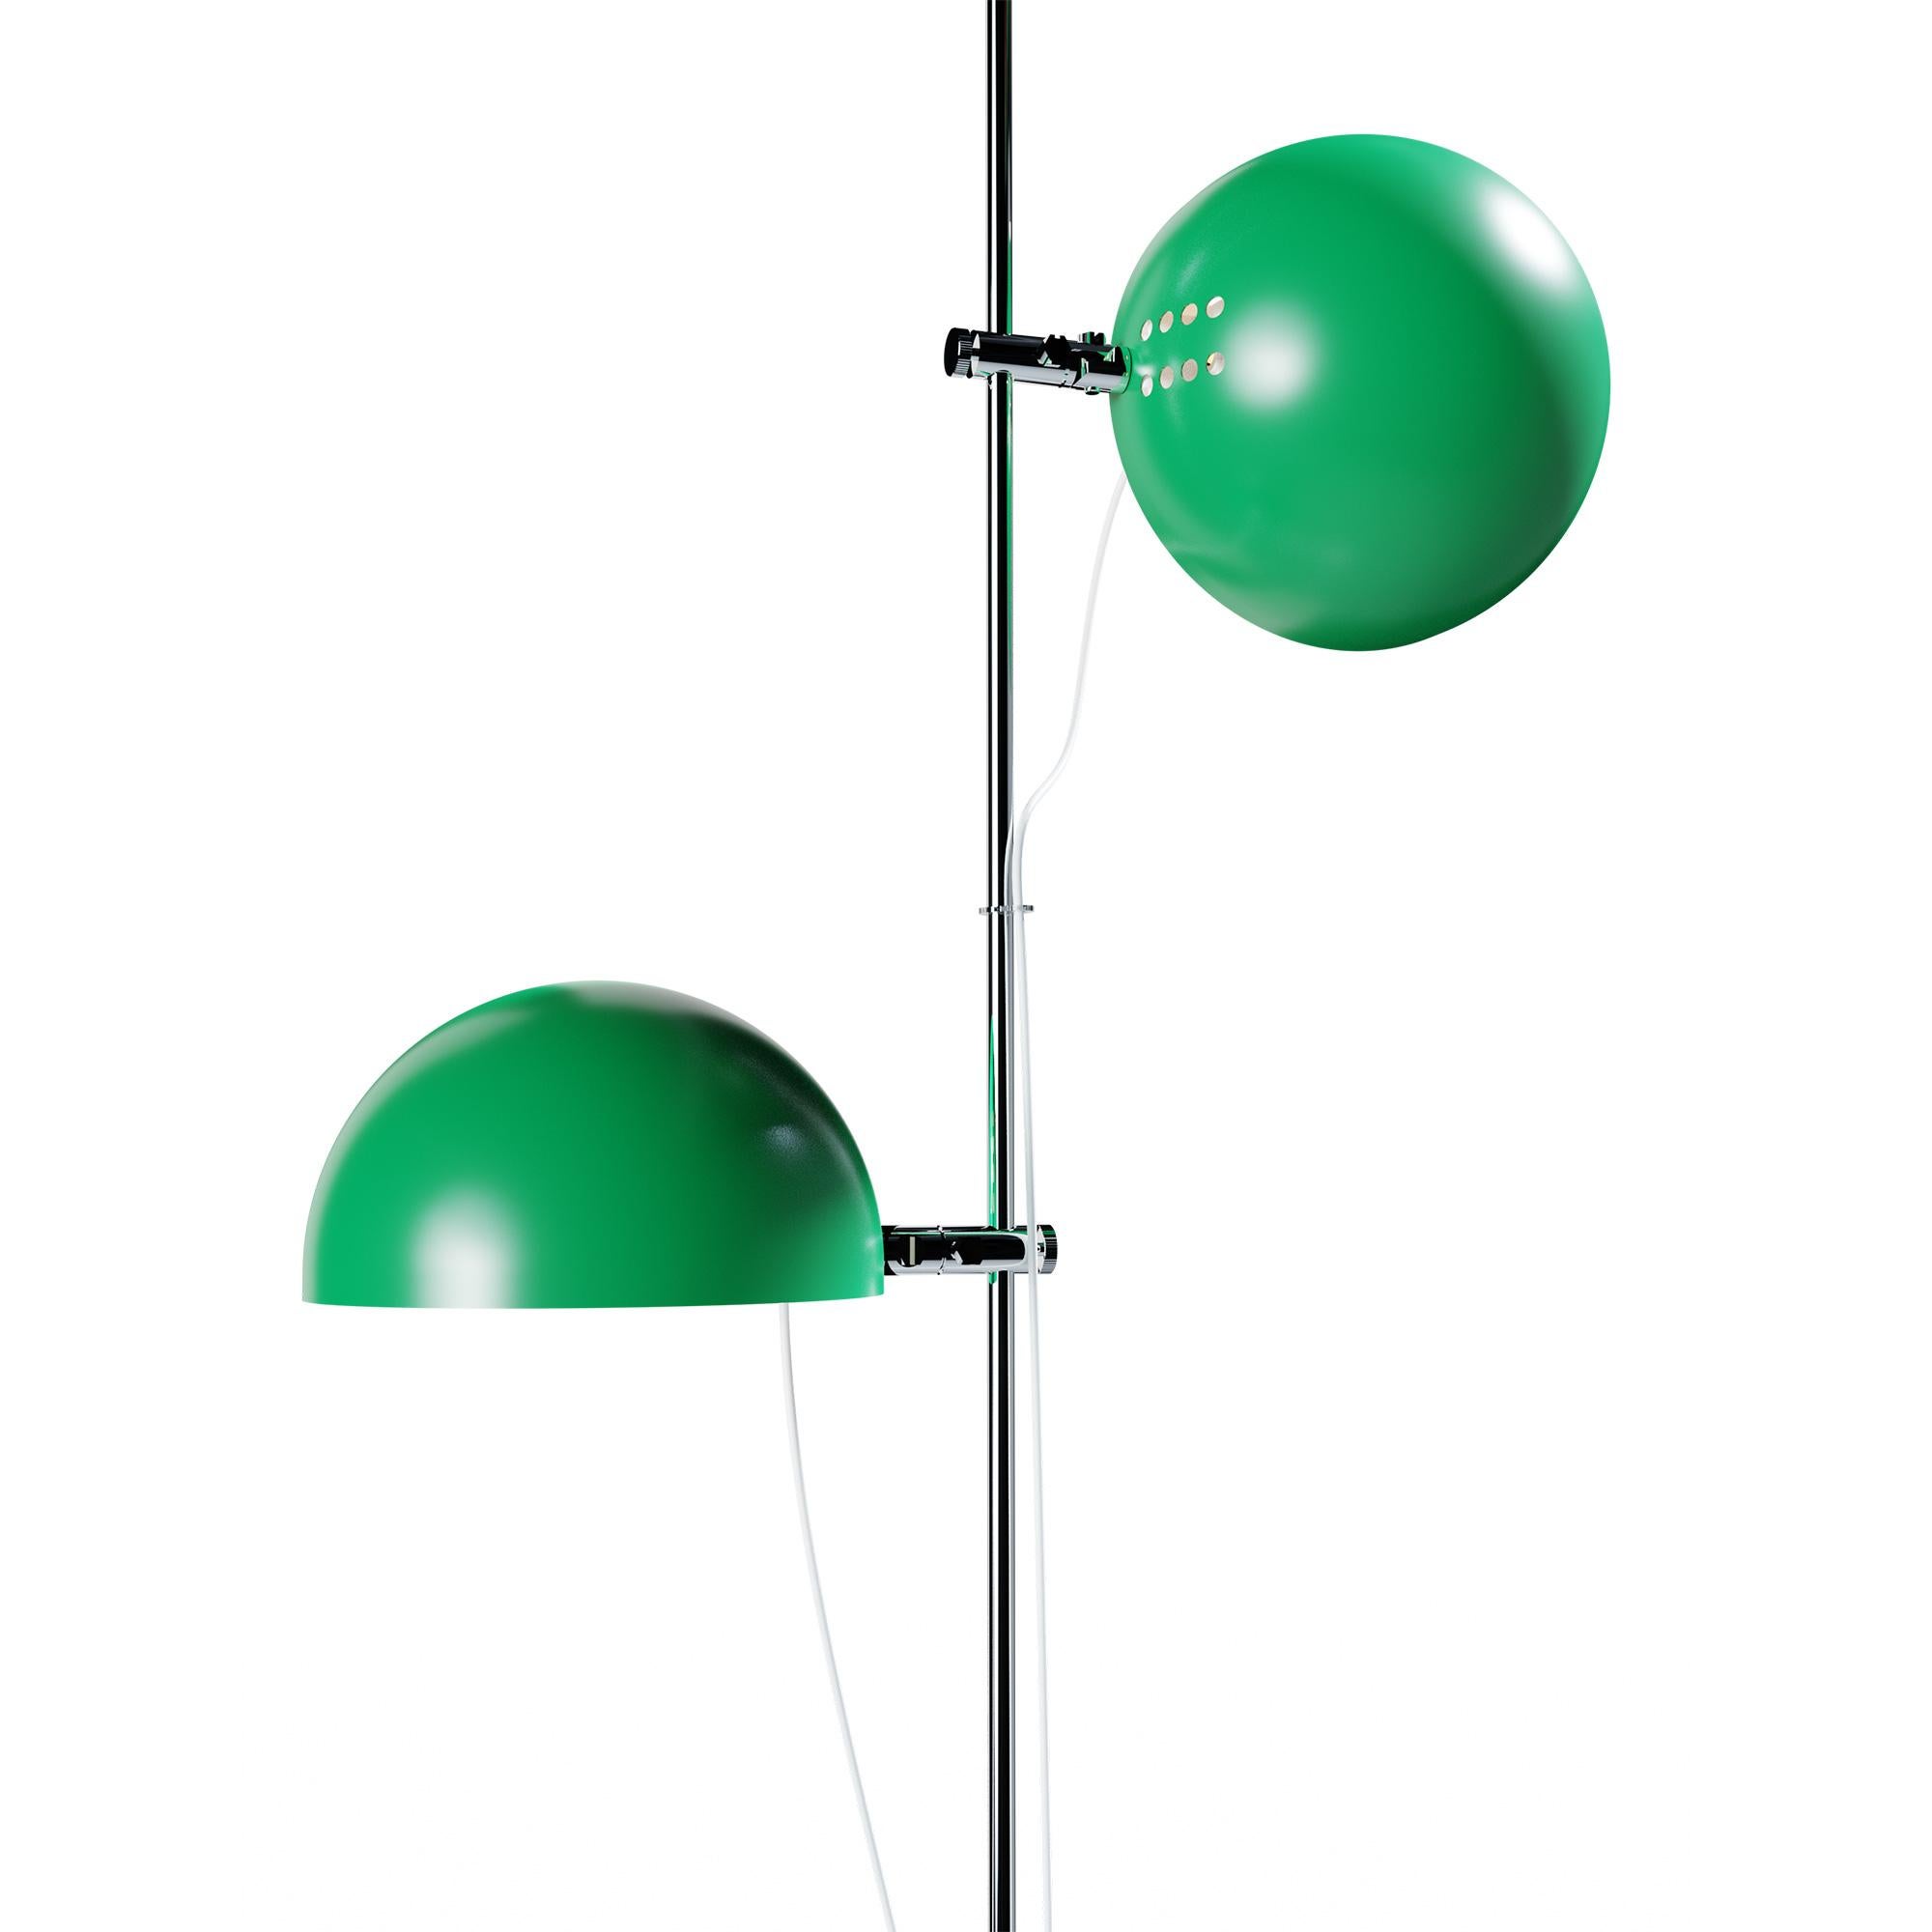 Alain Richard 'A23' metal and marble floor lamp for Disderot in green.

Executed in green painted metal with a marble base, this newly produced numbered edition with included certificate of authenticity is made in France by Disderot with many of